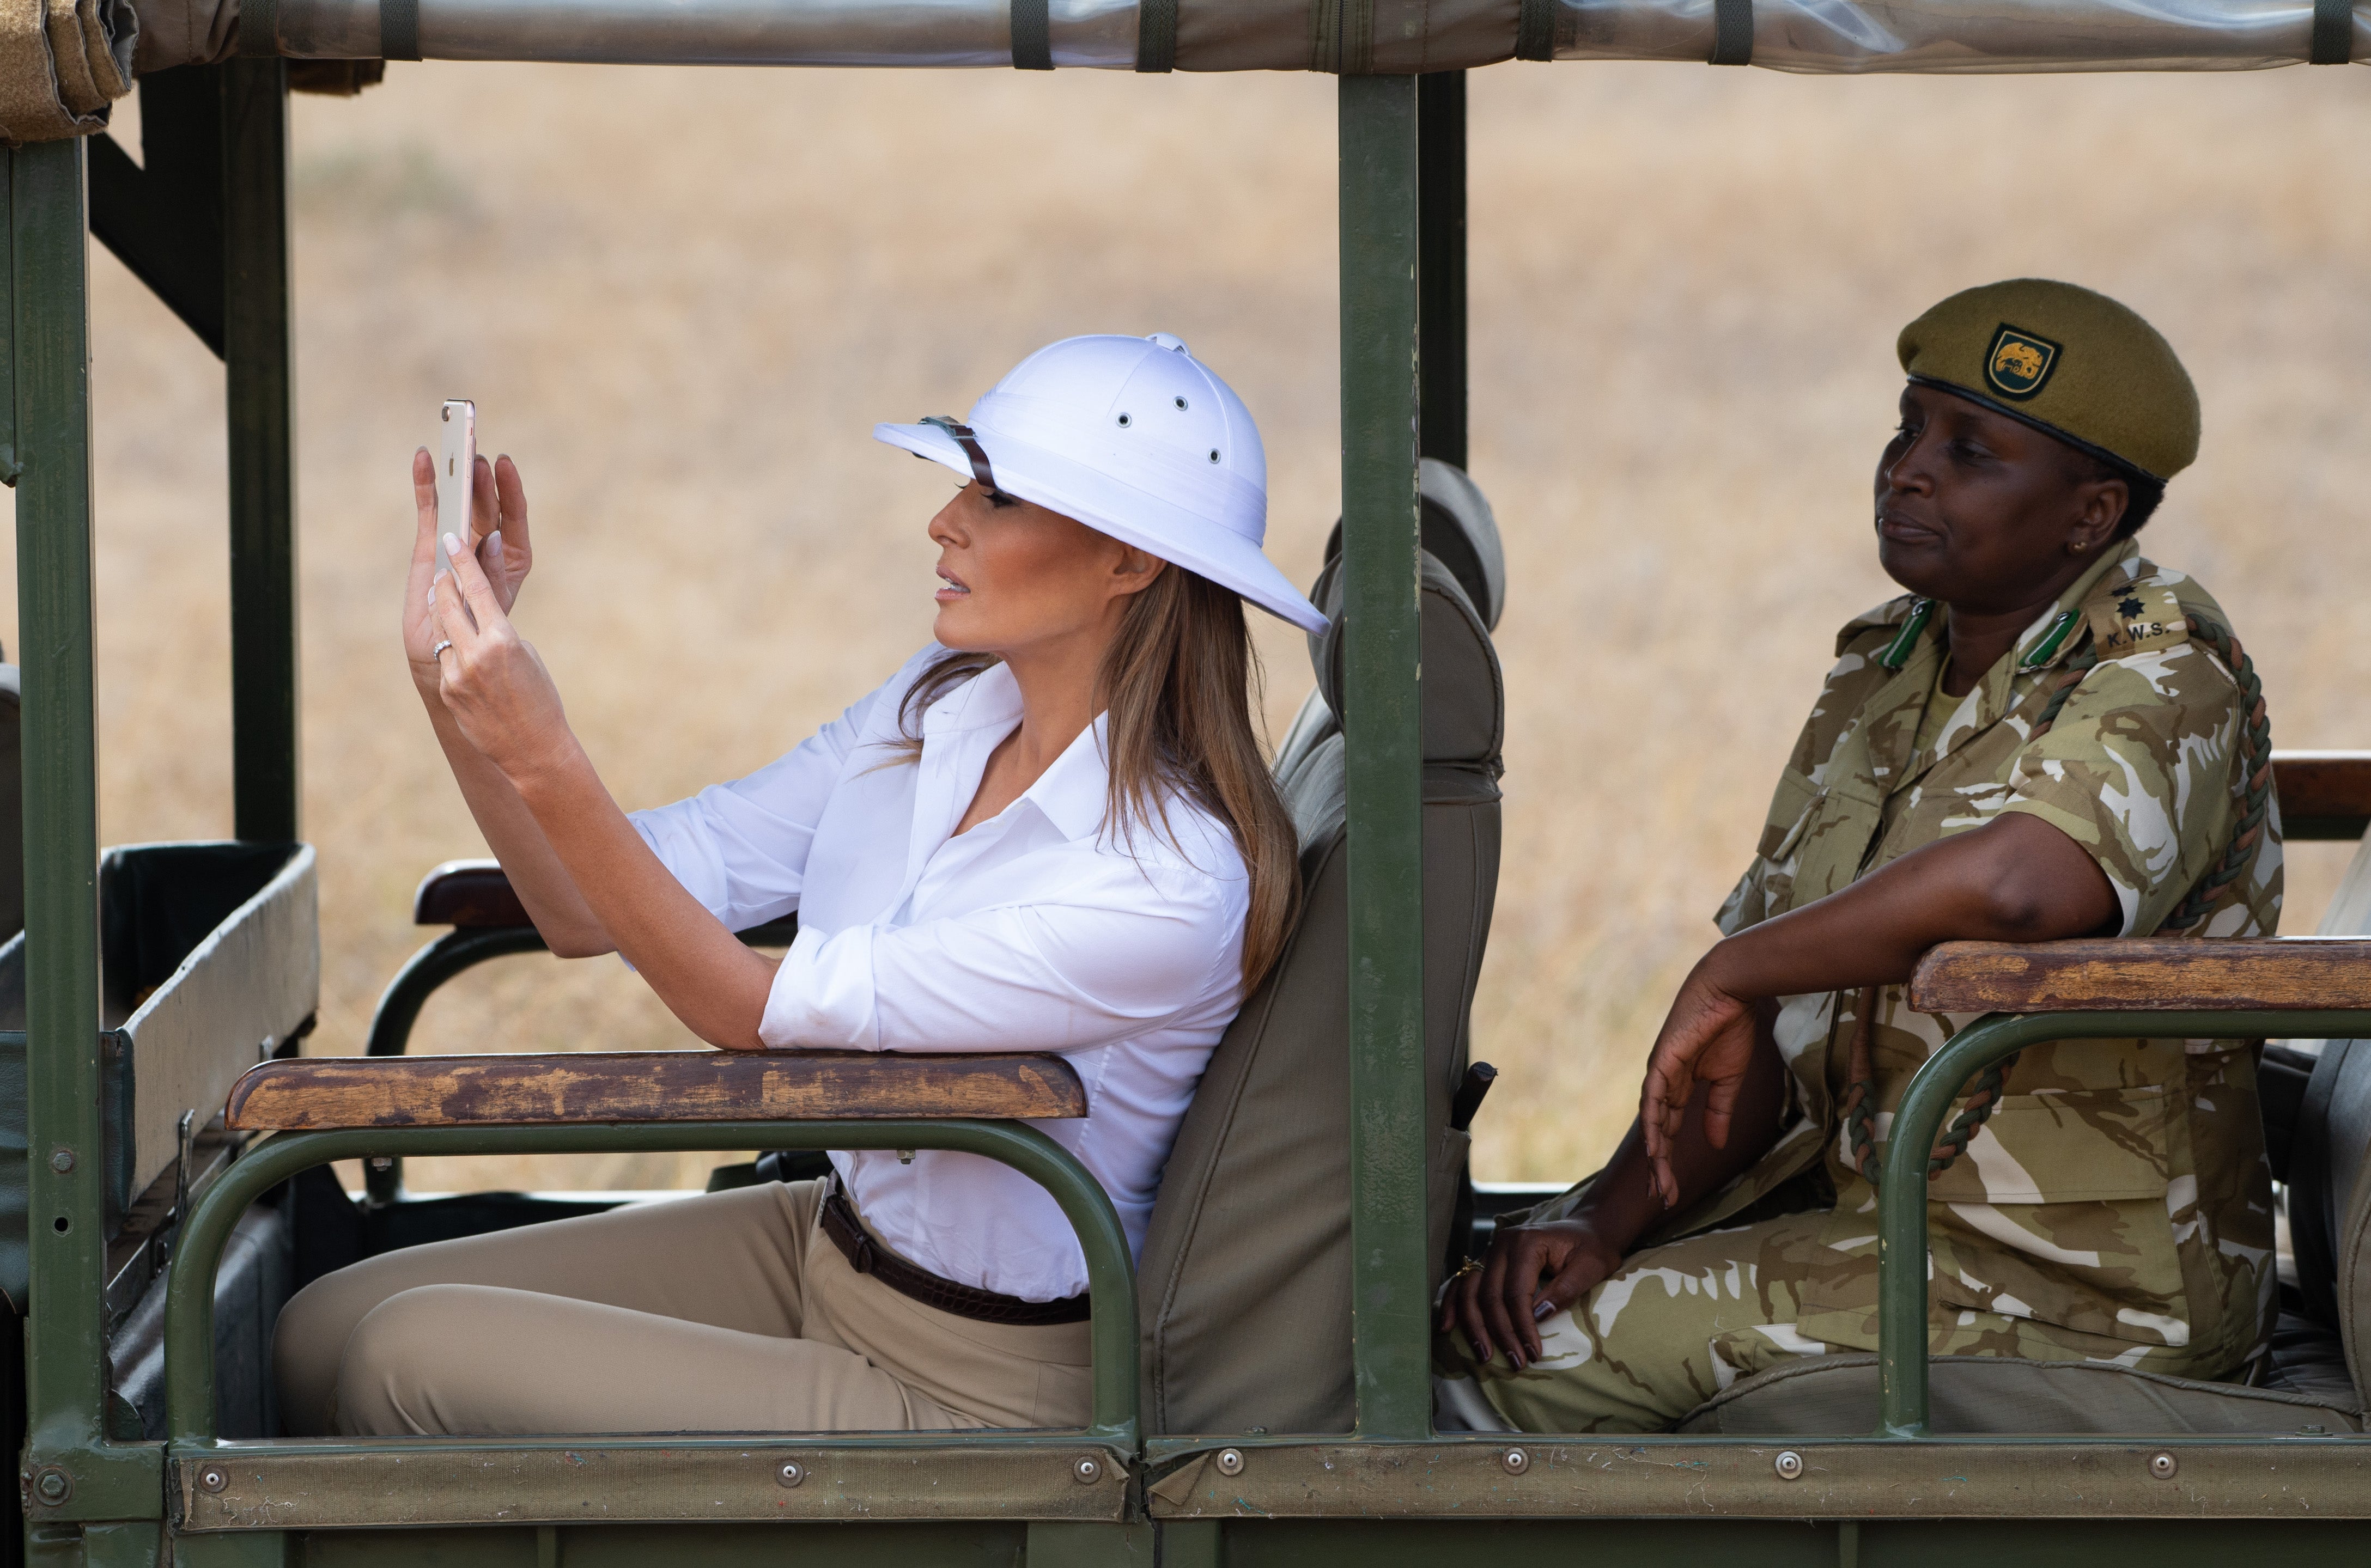 Is This Another Fashion Faux-Pas By First Lady Melania Trump?